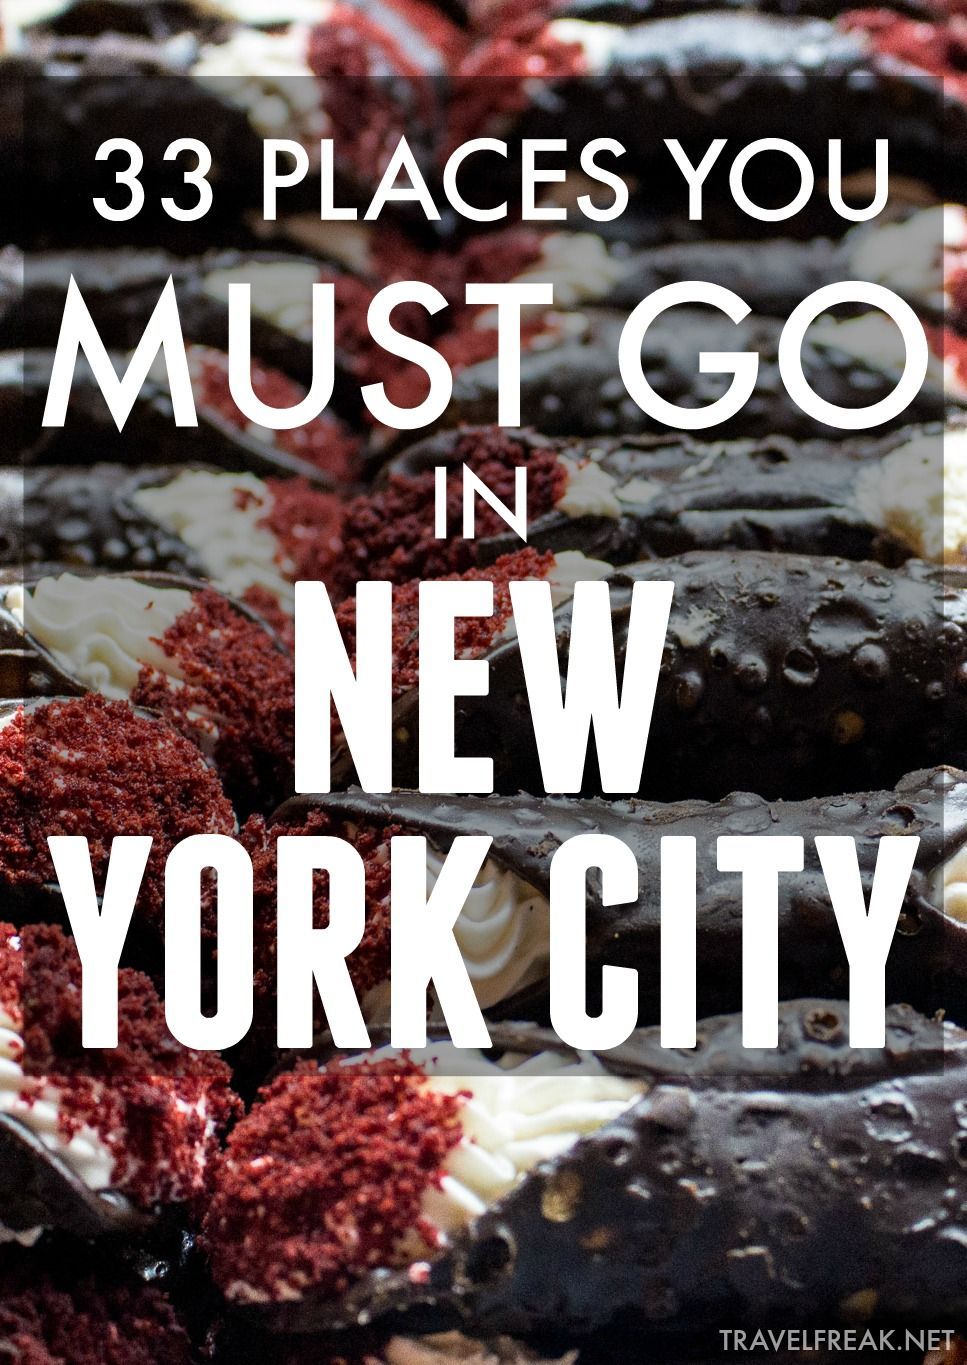 Visiting New York City? Check out these 33 amazing places to eat, drink, and get your groove on.